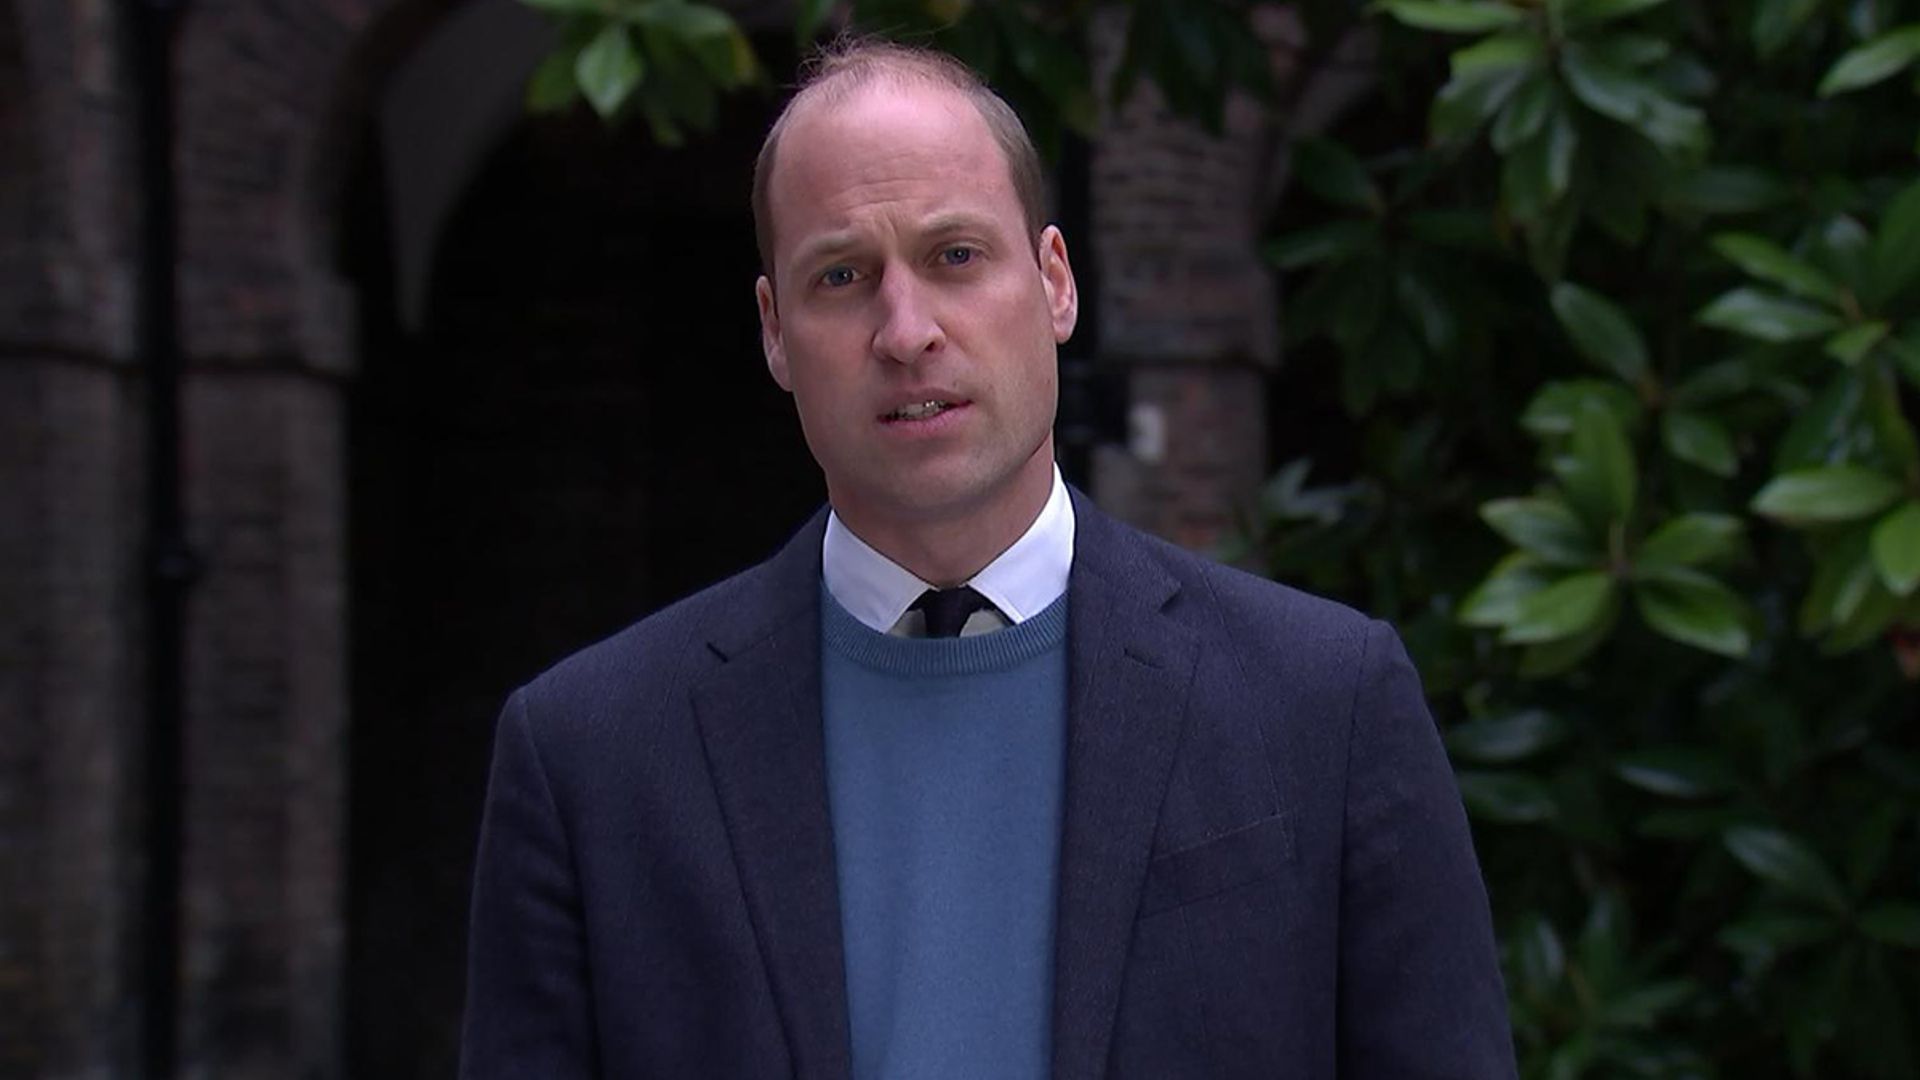 Prince William tells BBC in emotional video: 'You failed my mother'